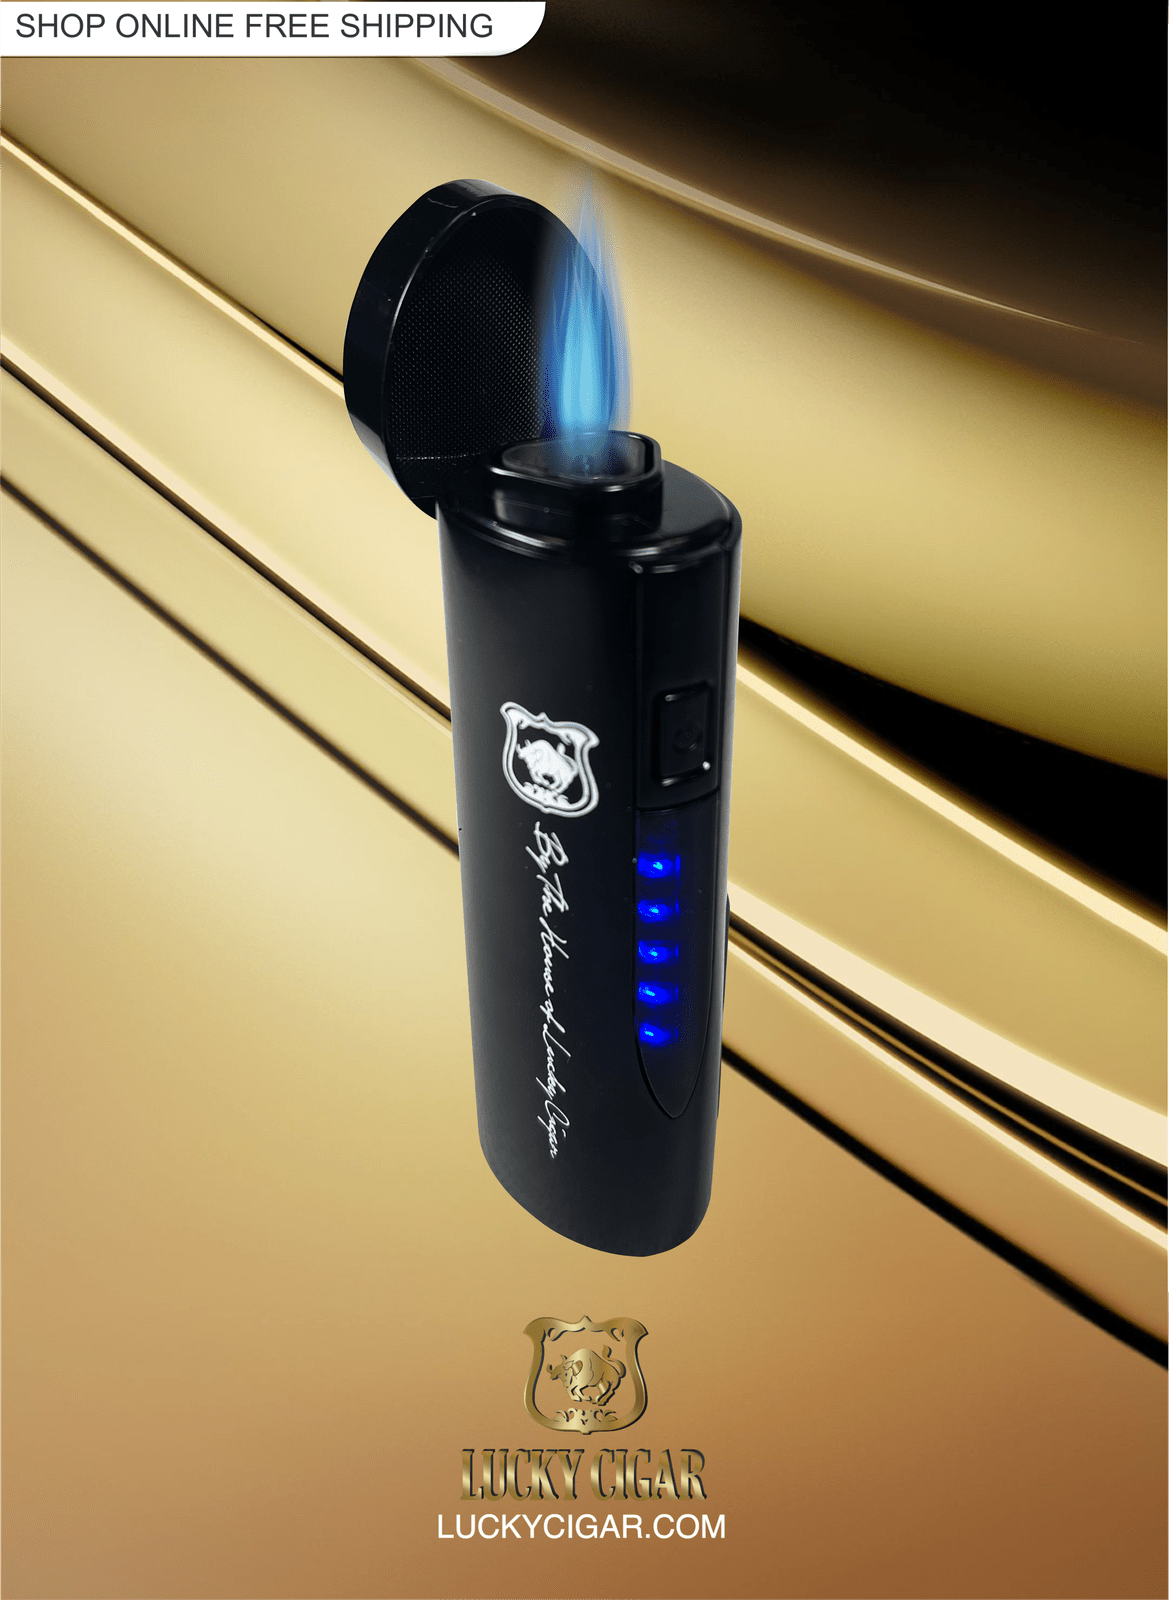 Cigar Lifestyle Accessories: Torch Lighter with Punch in Black